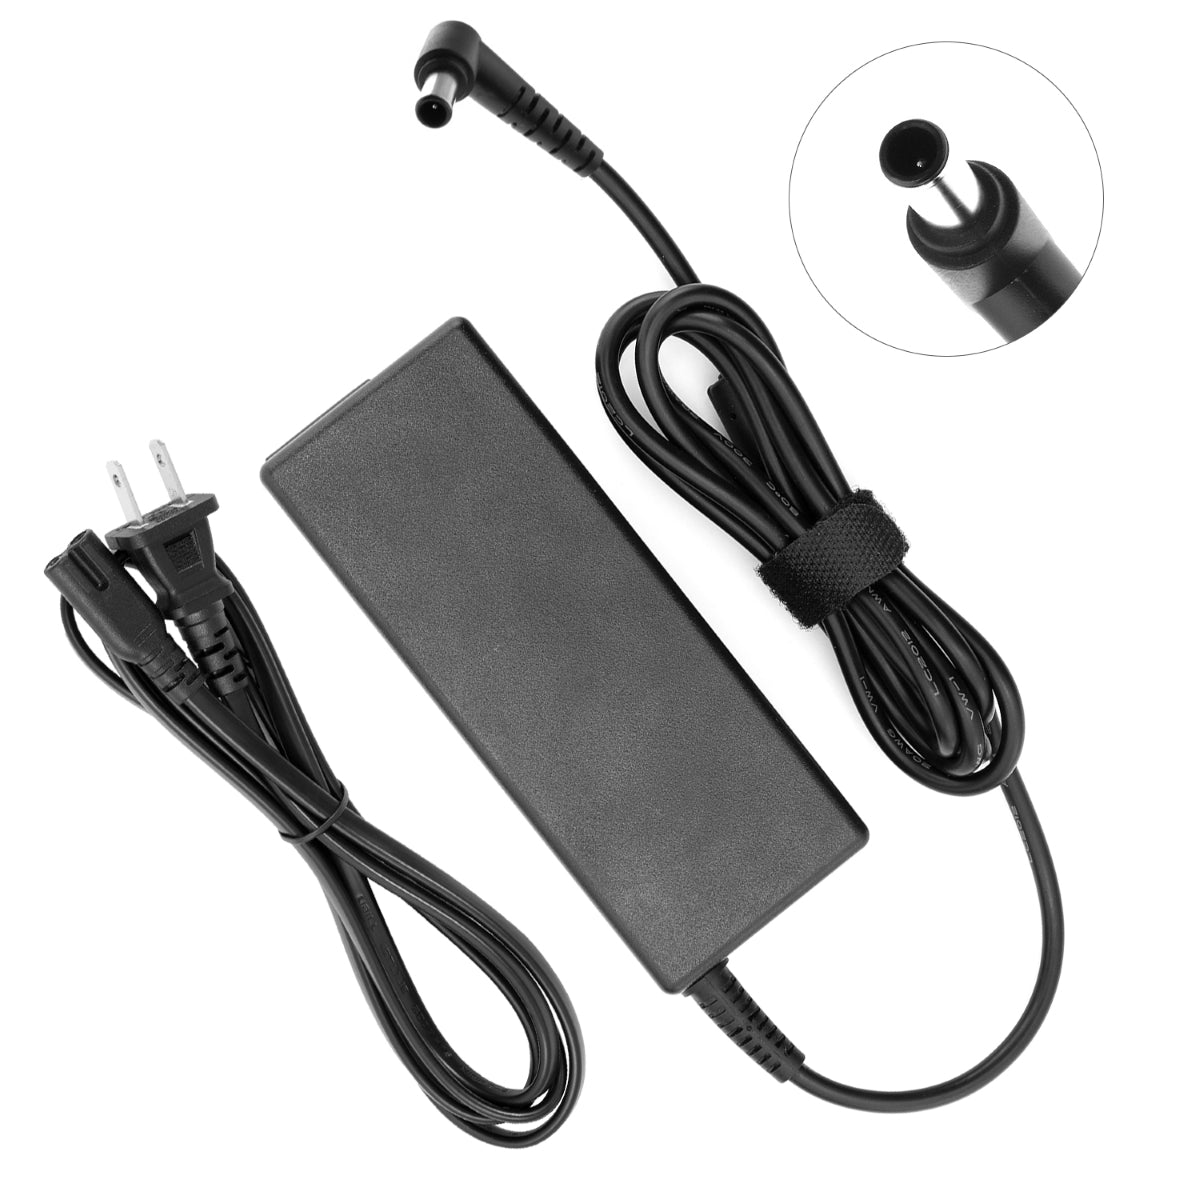 AC Adapter Power Supply for Samsung LT24E310ND Monitor